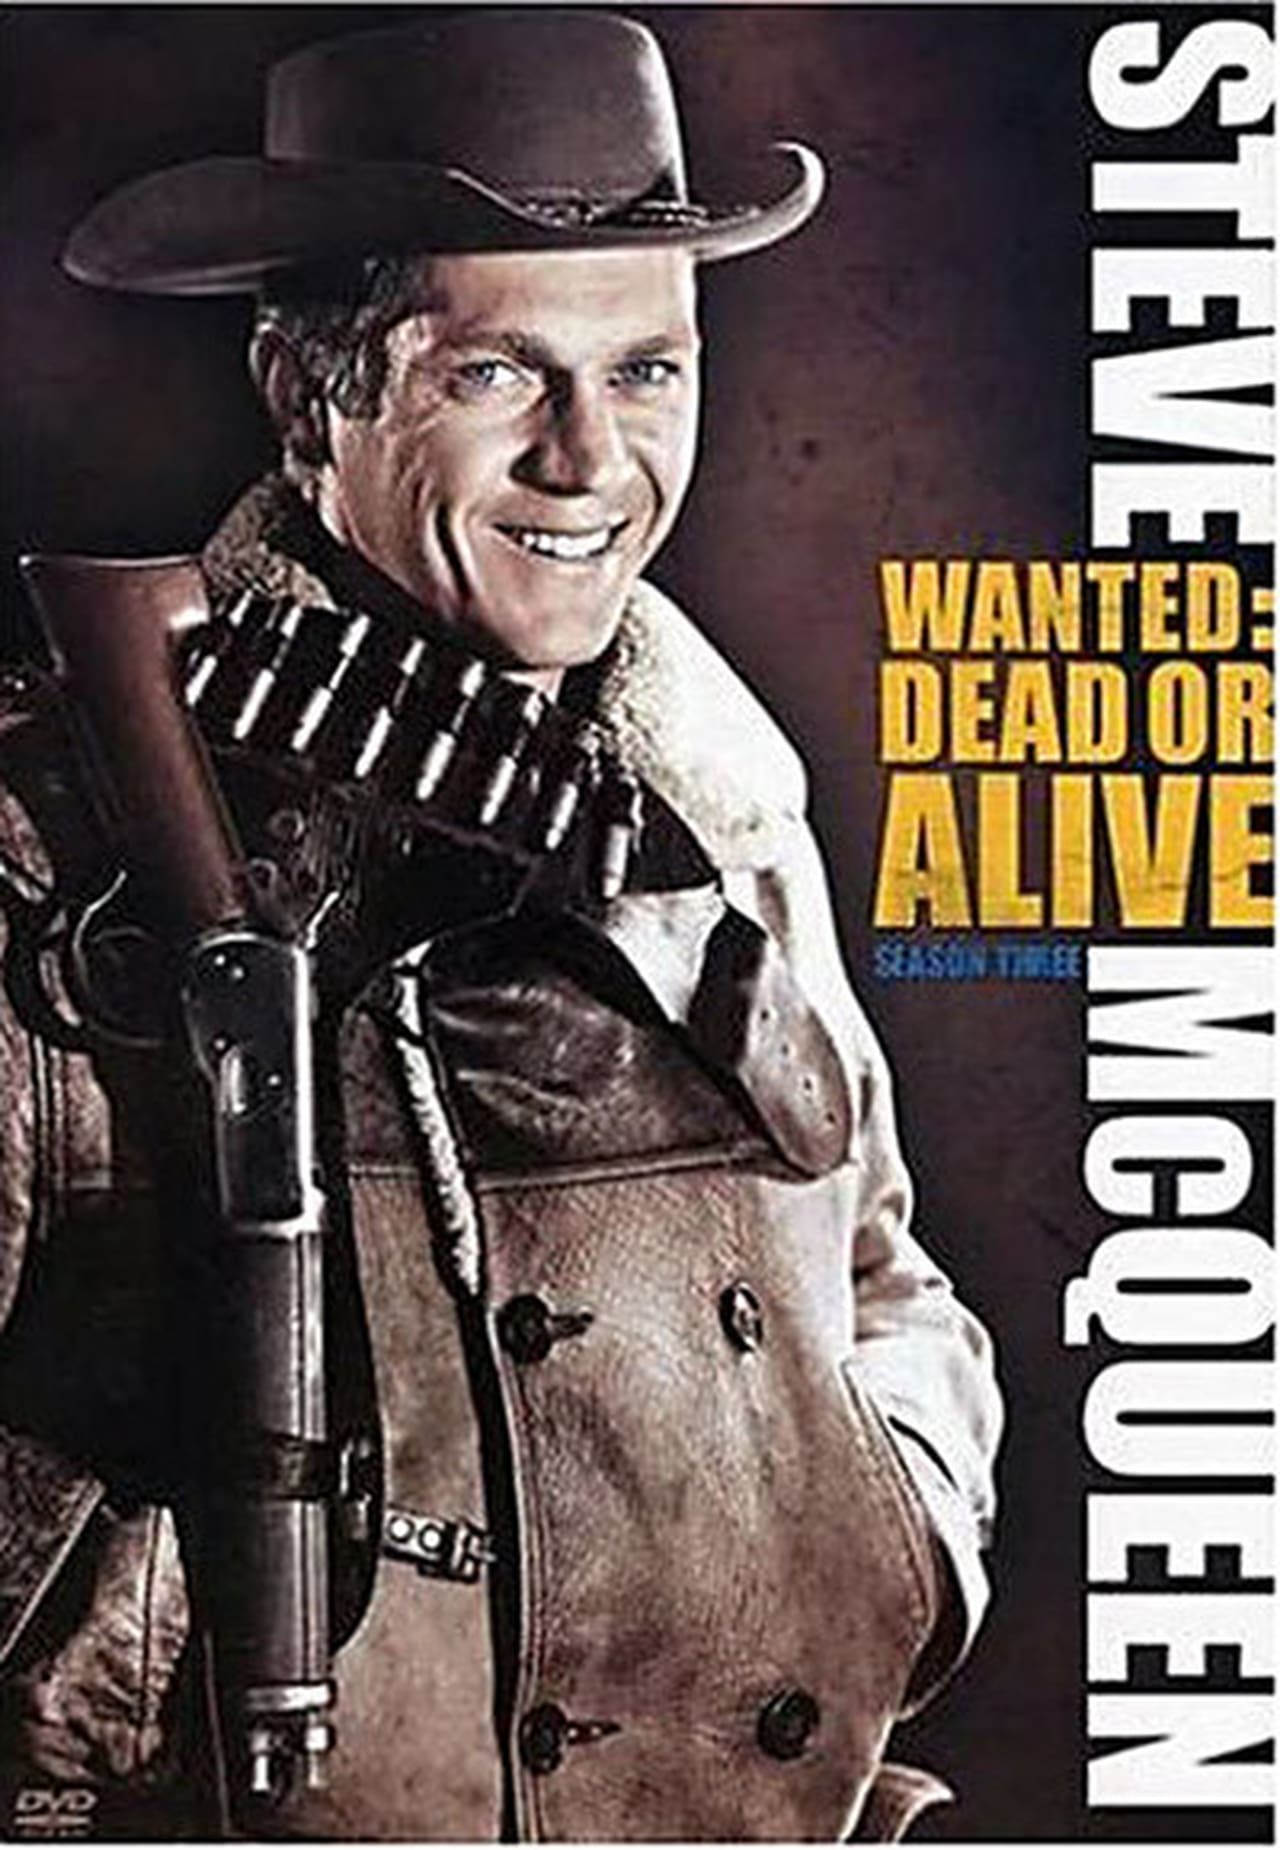 Wanted: Dead Or Alive Season 3